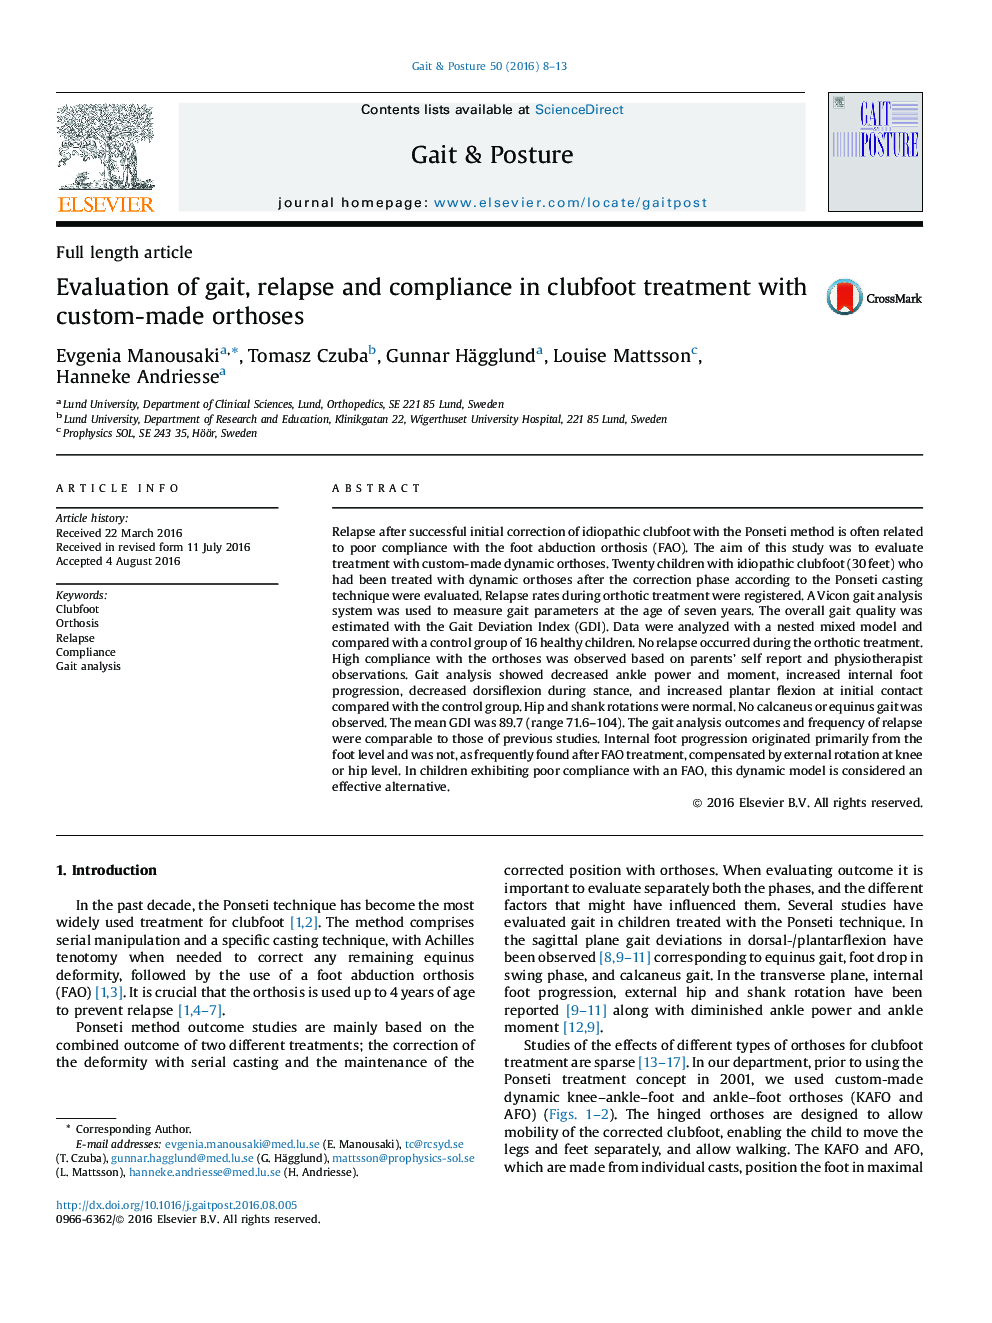 Evaluation of gait, relapse and compliance in clubfoot treatment with custom-made orthoses